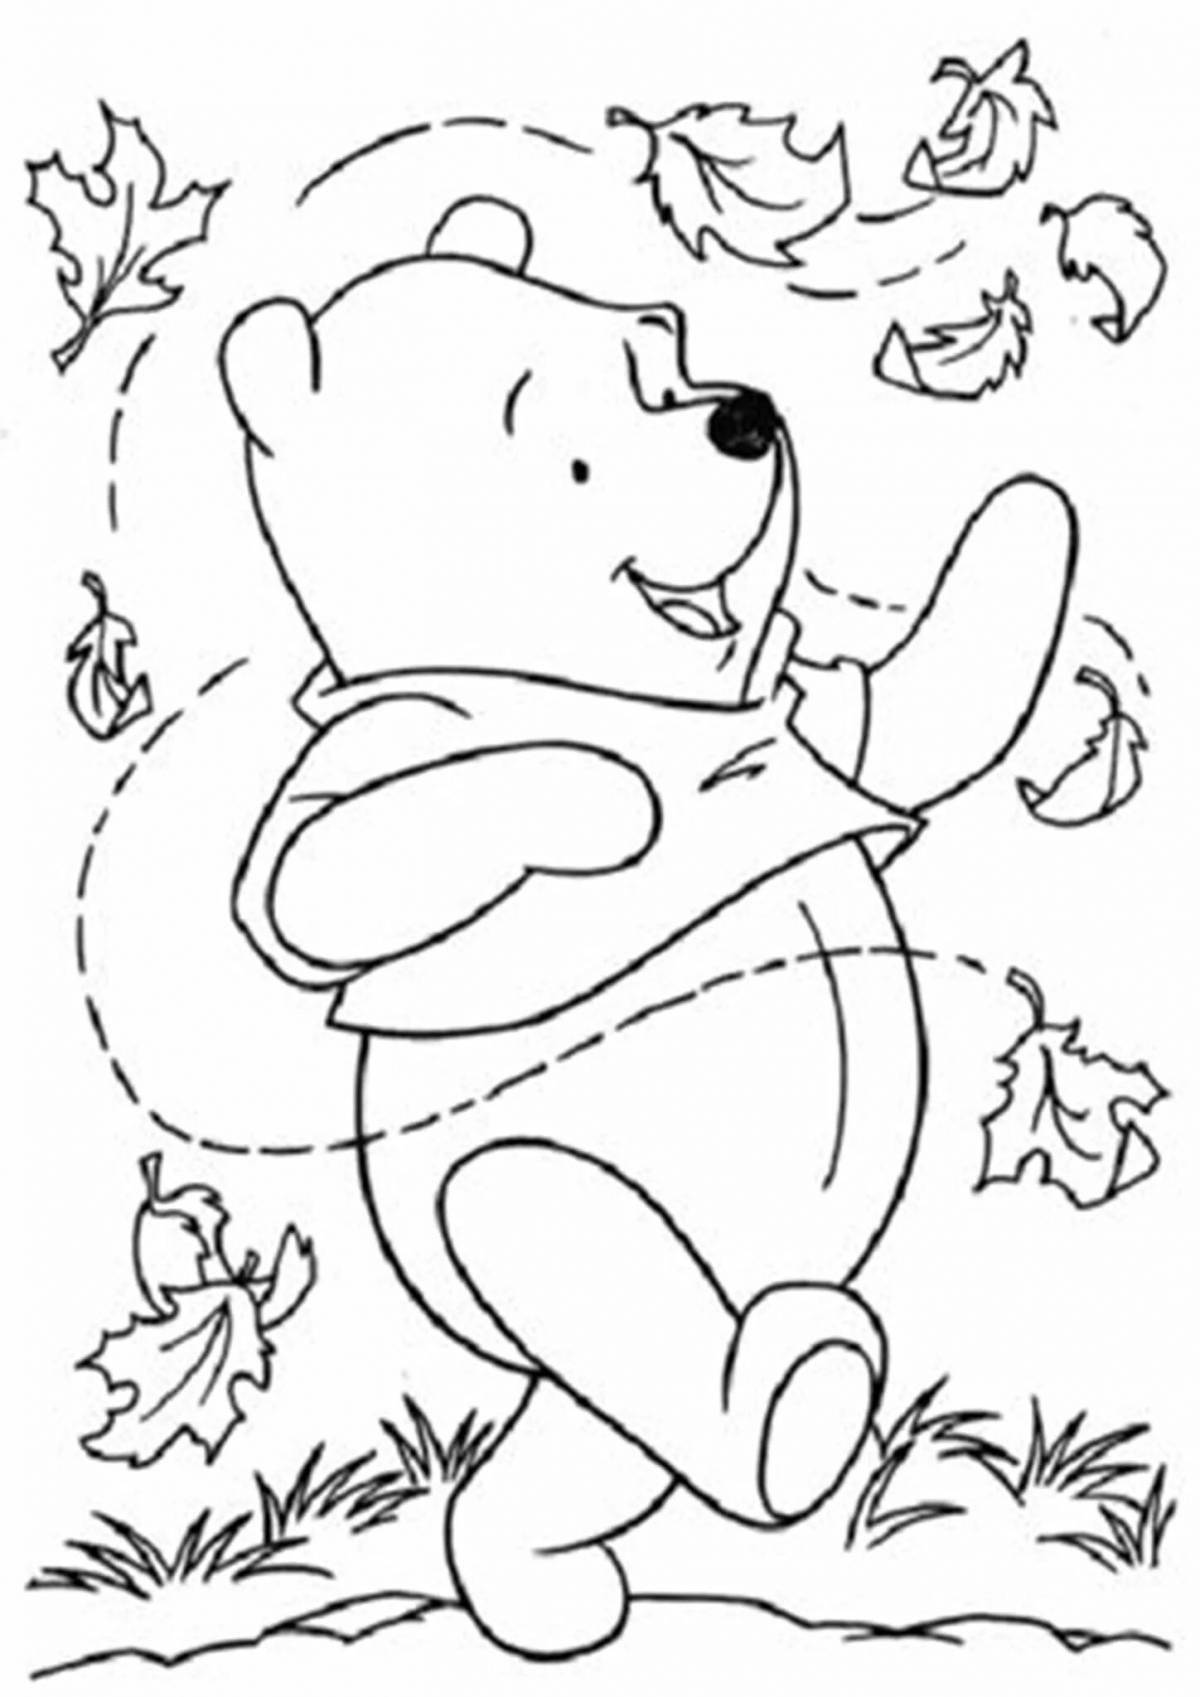 Great coloring book winnie the pooh for kids